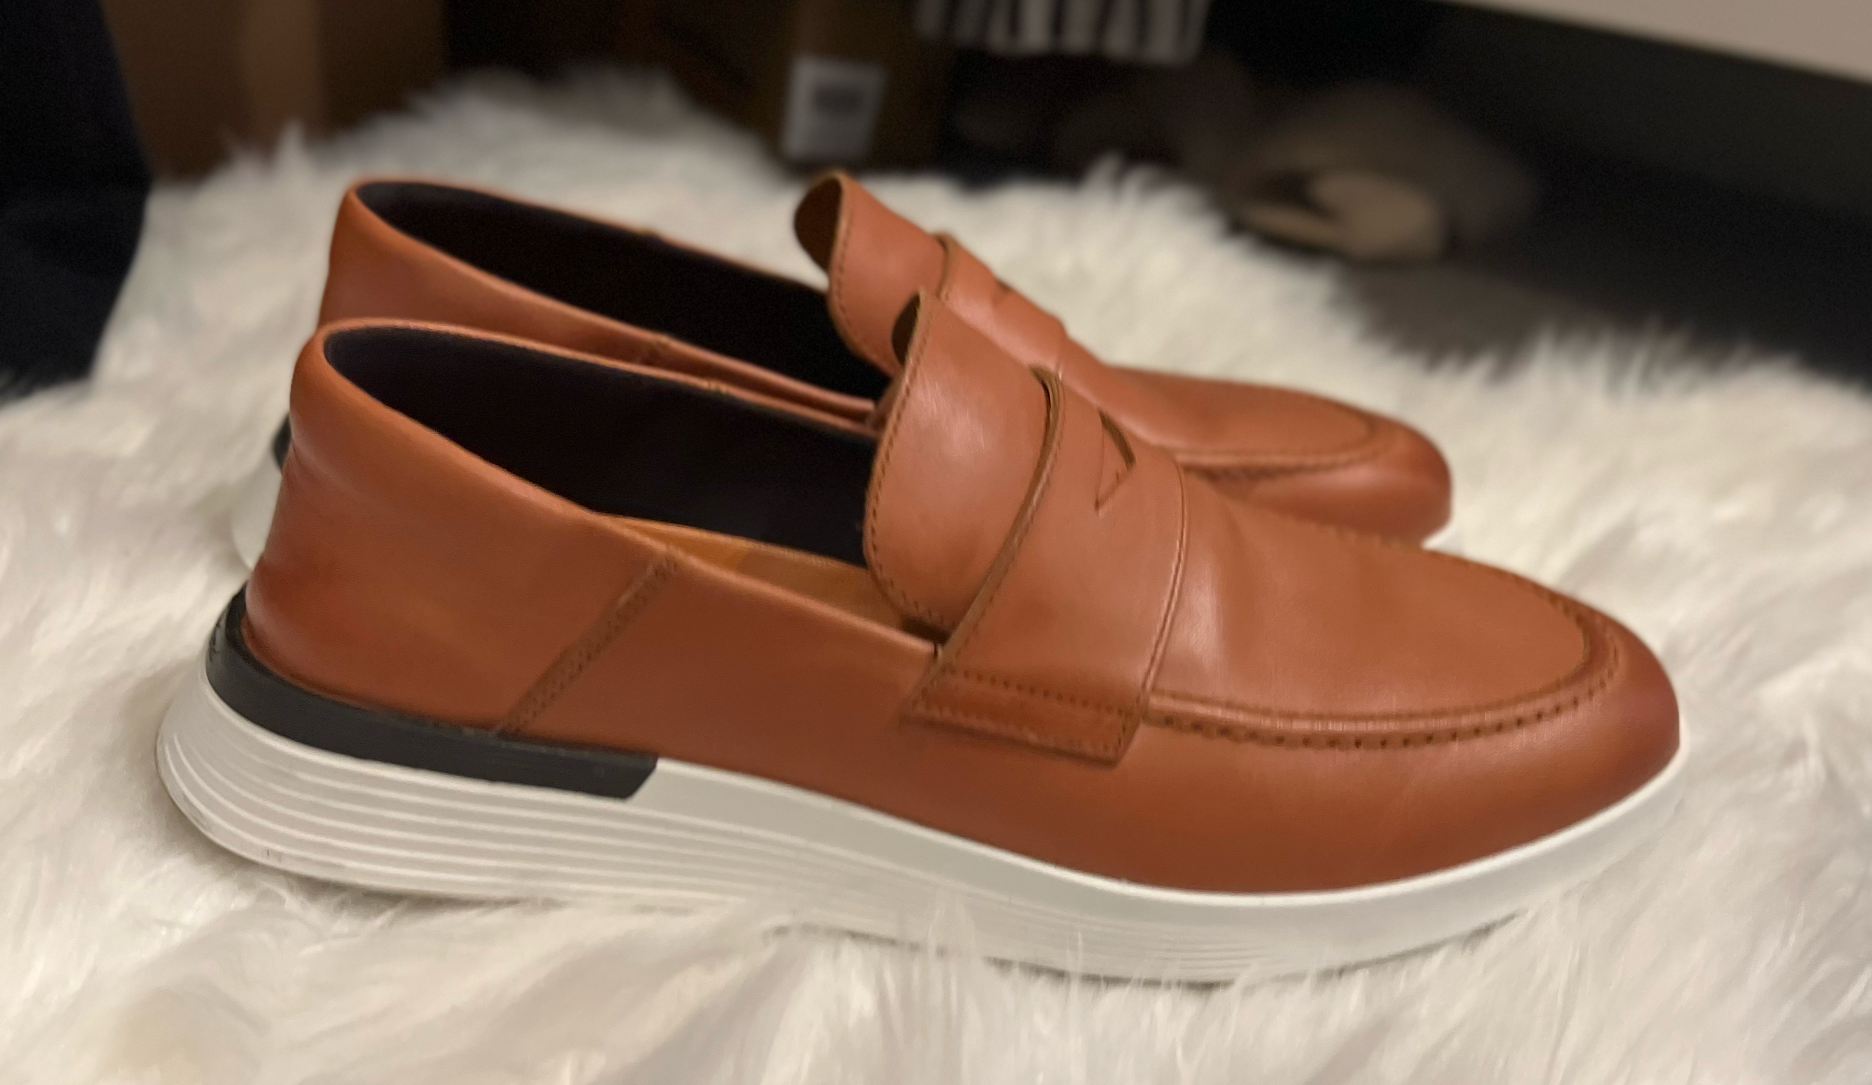 Wolf & Shepherd Crossover Loafers Review: My New Favorite Loafers 5